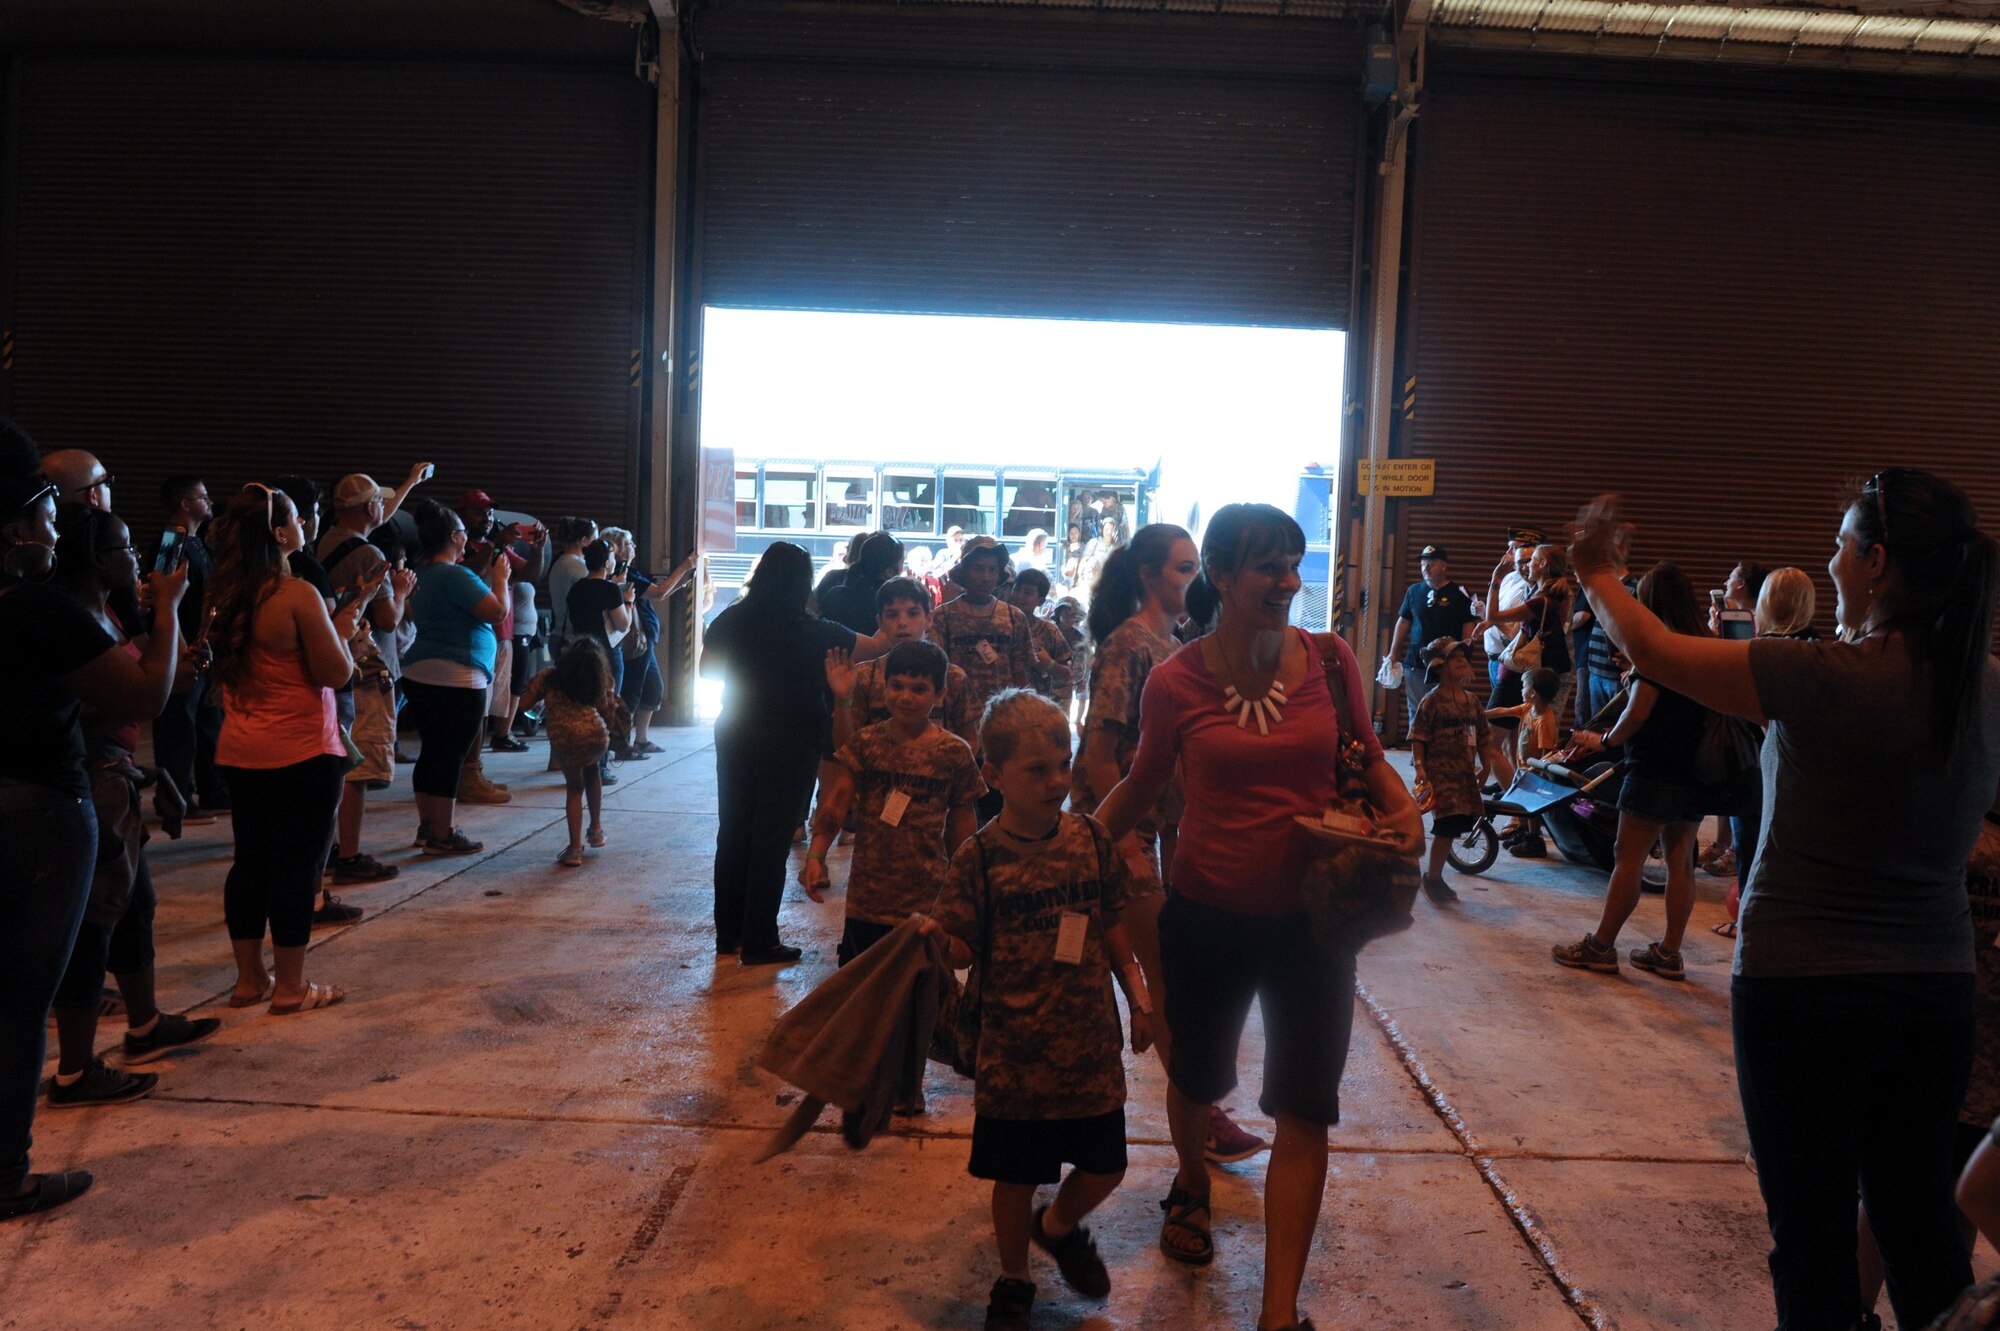 Operation Kids participants receive a hero’s welcome home upon returning from a simulated deployment Oct. 15 at Luke Air Force Base, Ariz. More than 120 children attended the event. (U.S. Air Force Photos by Airman 1st Class Pedro Mota)